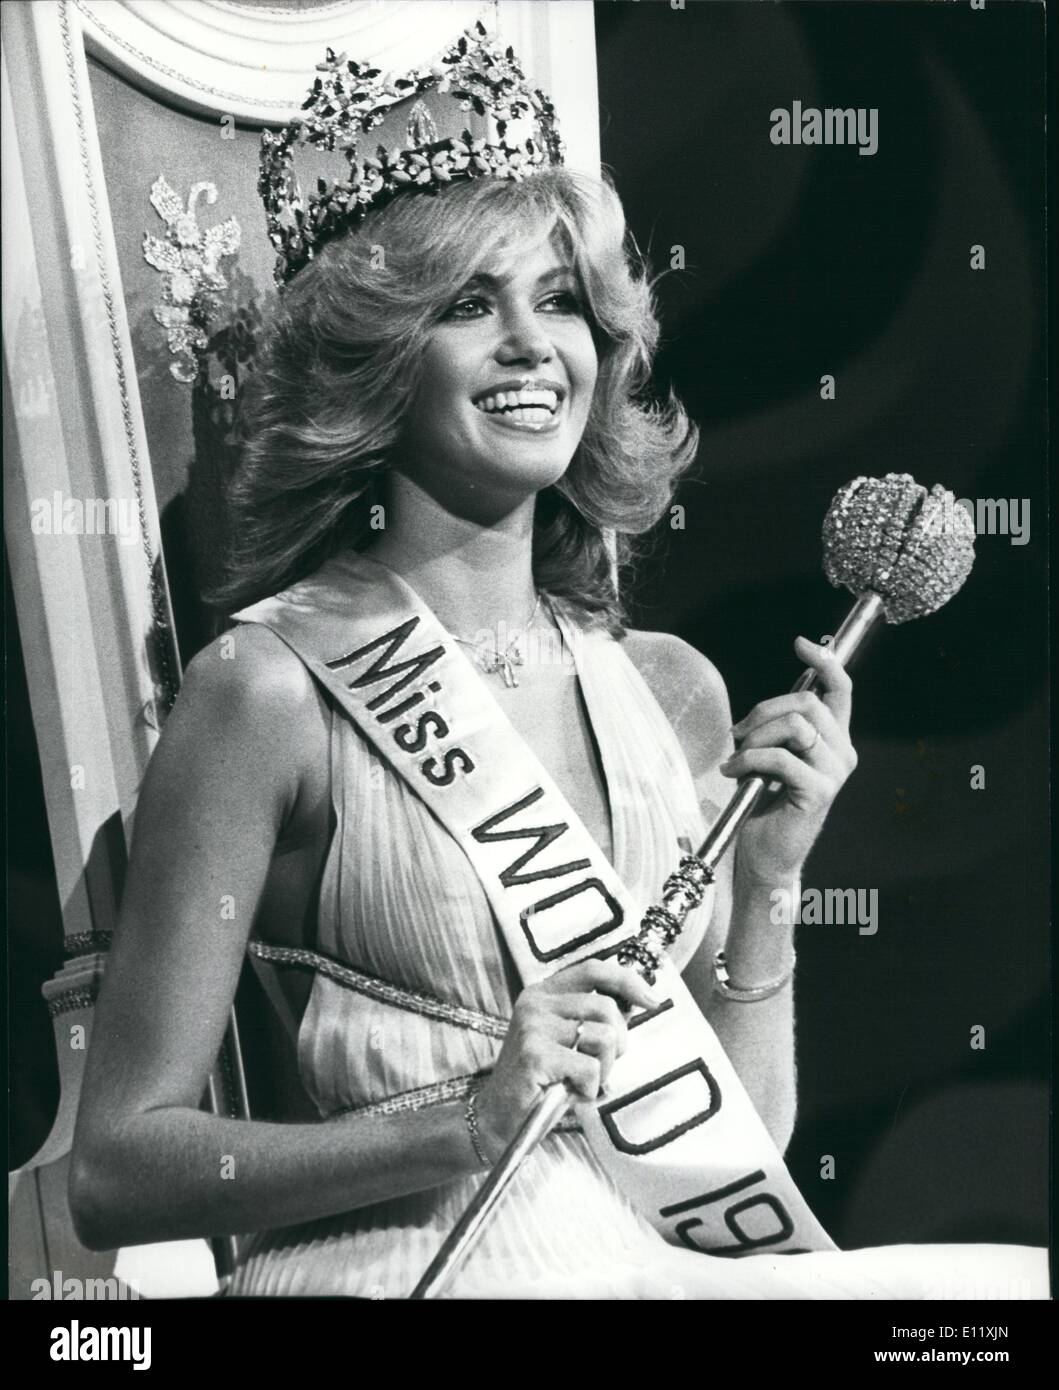 Nov. 11, 1980 - Miss Germany is Miss World: 18 year old Gabriella Brun Miss Germany, won the title of Miss World at London's Royal Albert Hall last night. Mies Guan wa the runner up, and Miss France came third, Gabriella lives in Los Angeles with her 52 year-old boy friend, Benno Bollenbsun, who is a film cameraman. Photo shows Gabriella Brum pictured after being crowned Miss World at London's Royal Albert Hall last night. Stock Photo